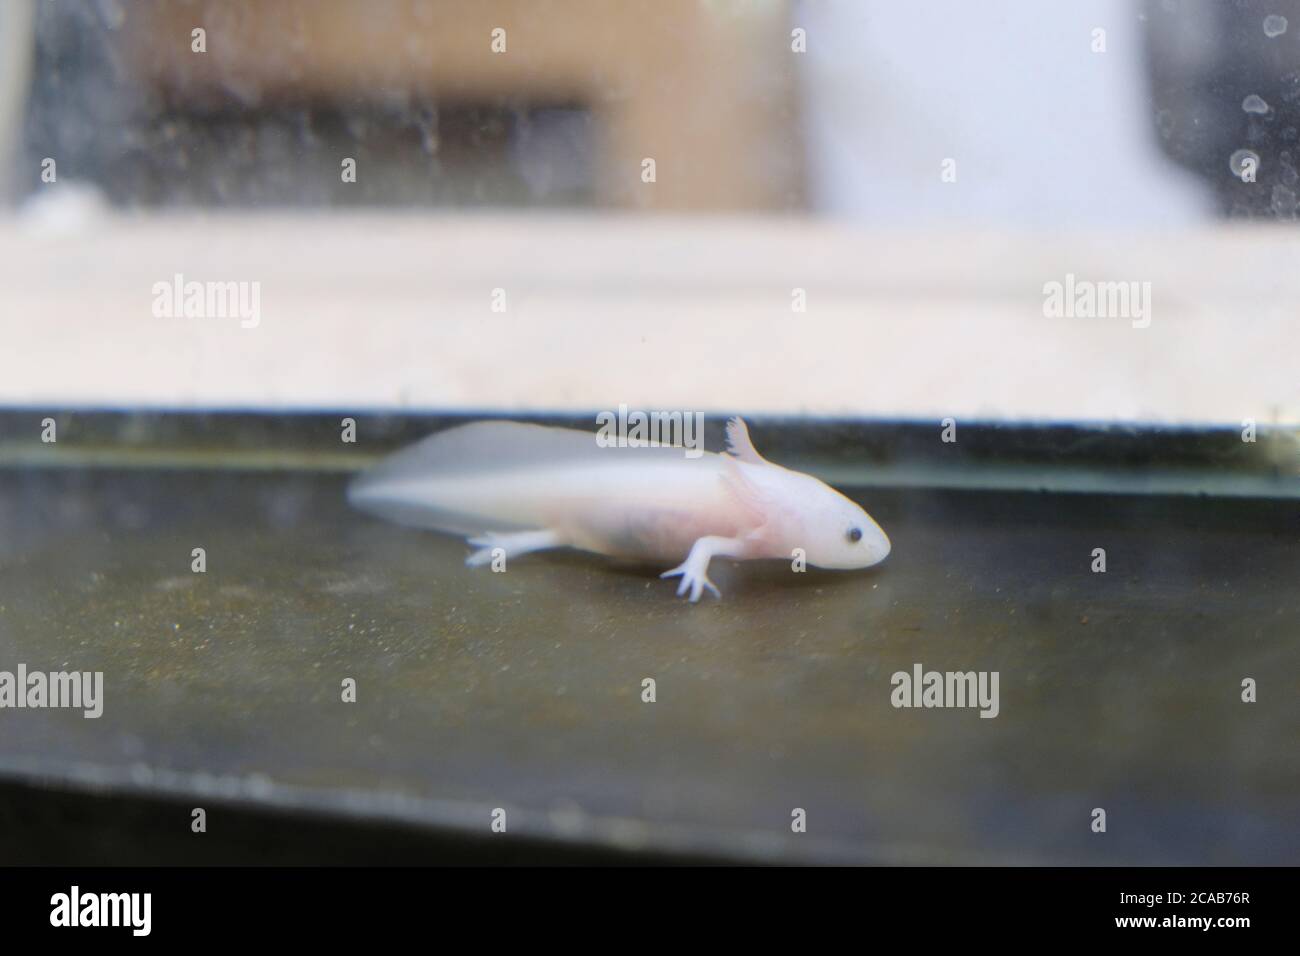 An Axolotl Also Known As The Mexican Walking Fish Is A Hardy And Very Low Maintenance Pet Stock Photo Alamy